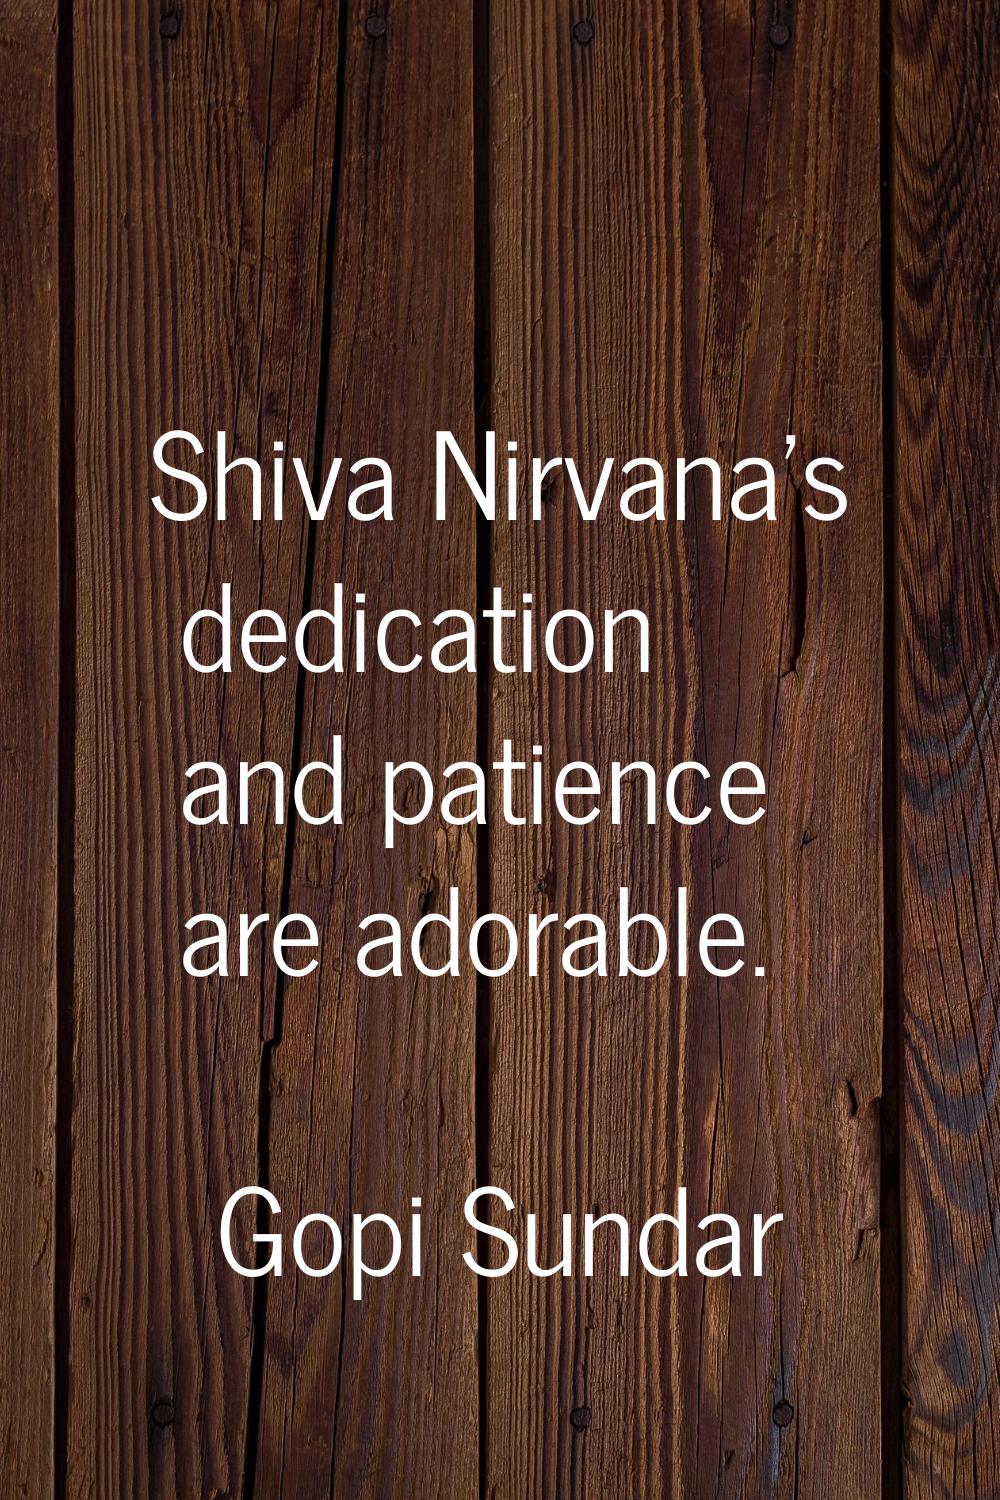 Shiva Nirvana's dedication and patience are adorable.